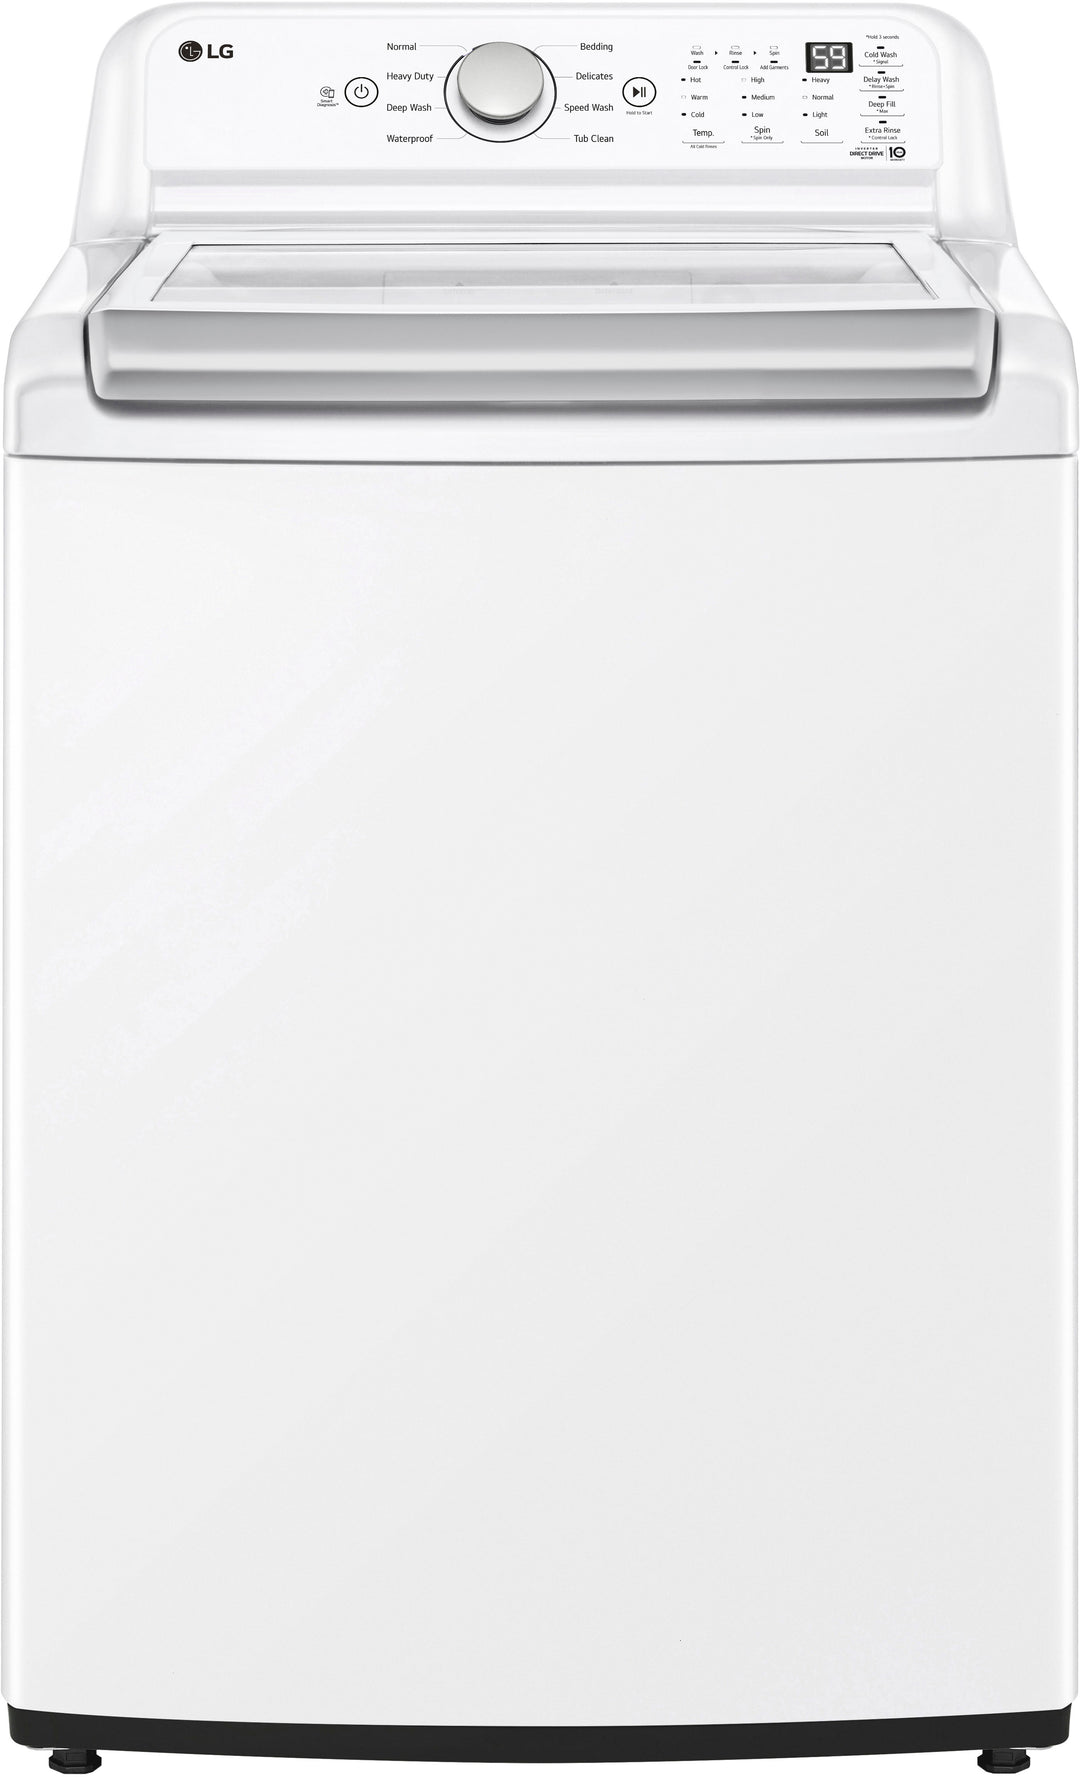 LG - 4.8 Cu. Ft. High-Efficiency Smart Top Load Washer with 4 Way Agitator and TurboDrum - White_0